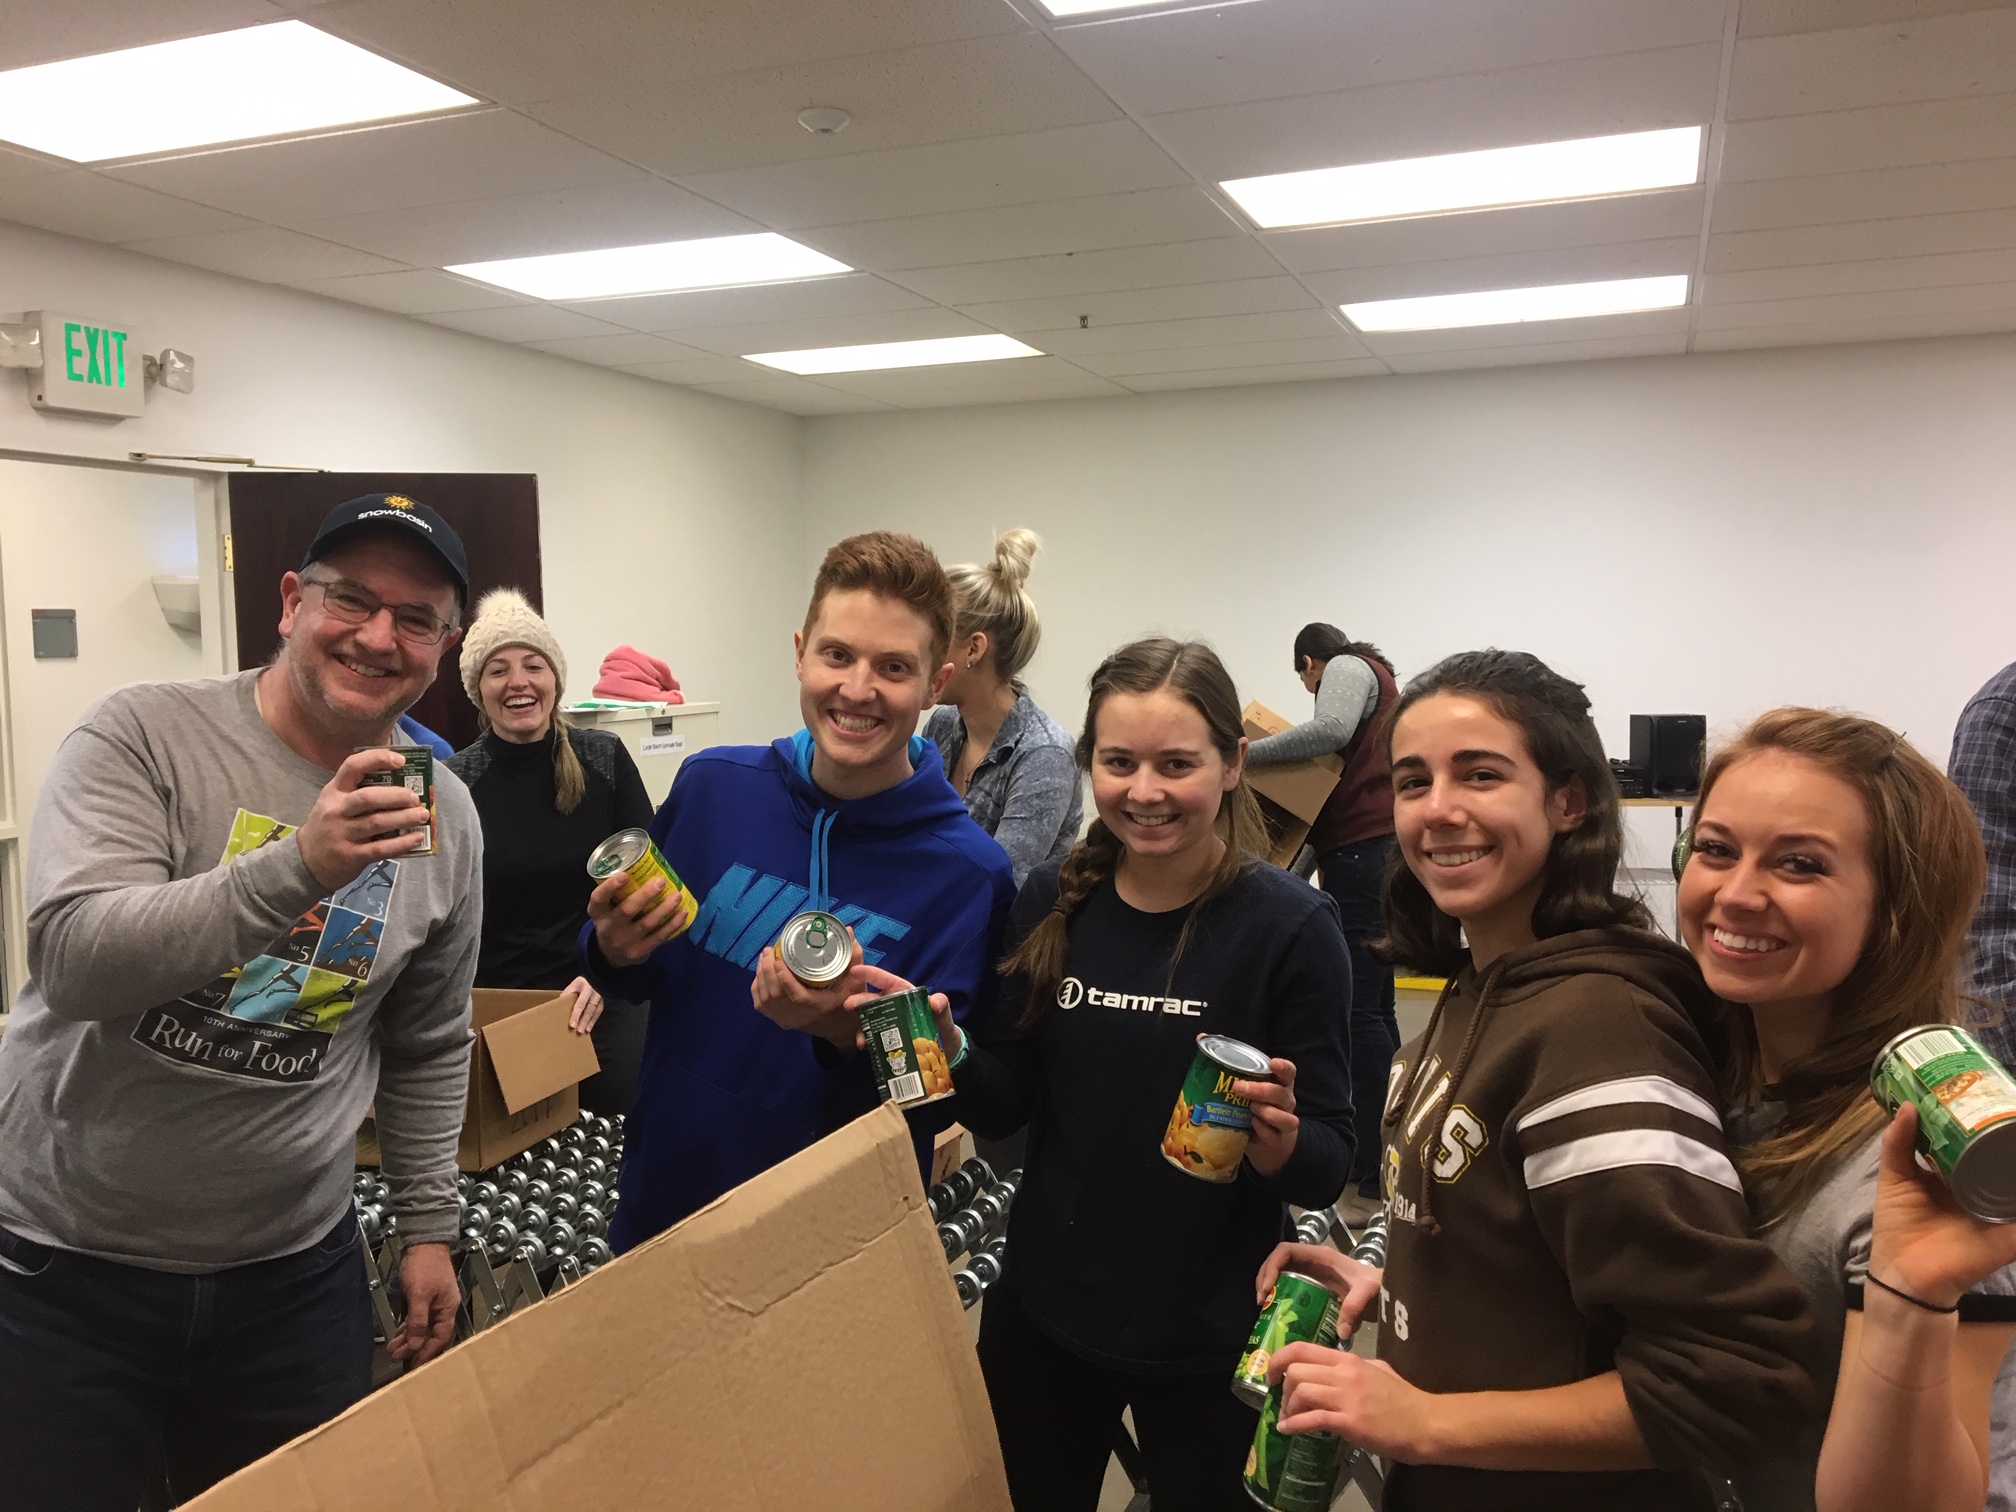 Alumni Food Drive 2018 collecting cans